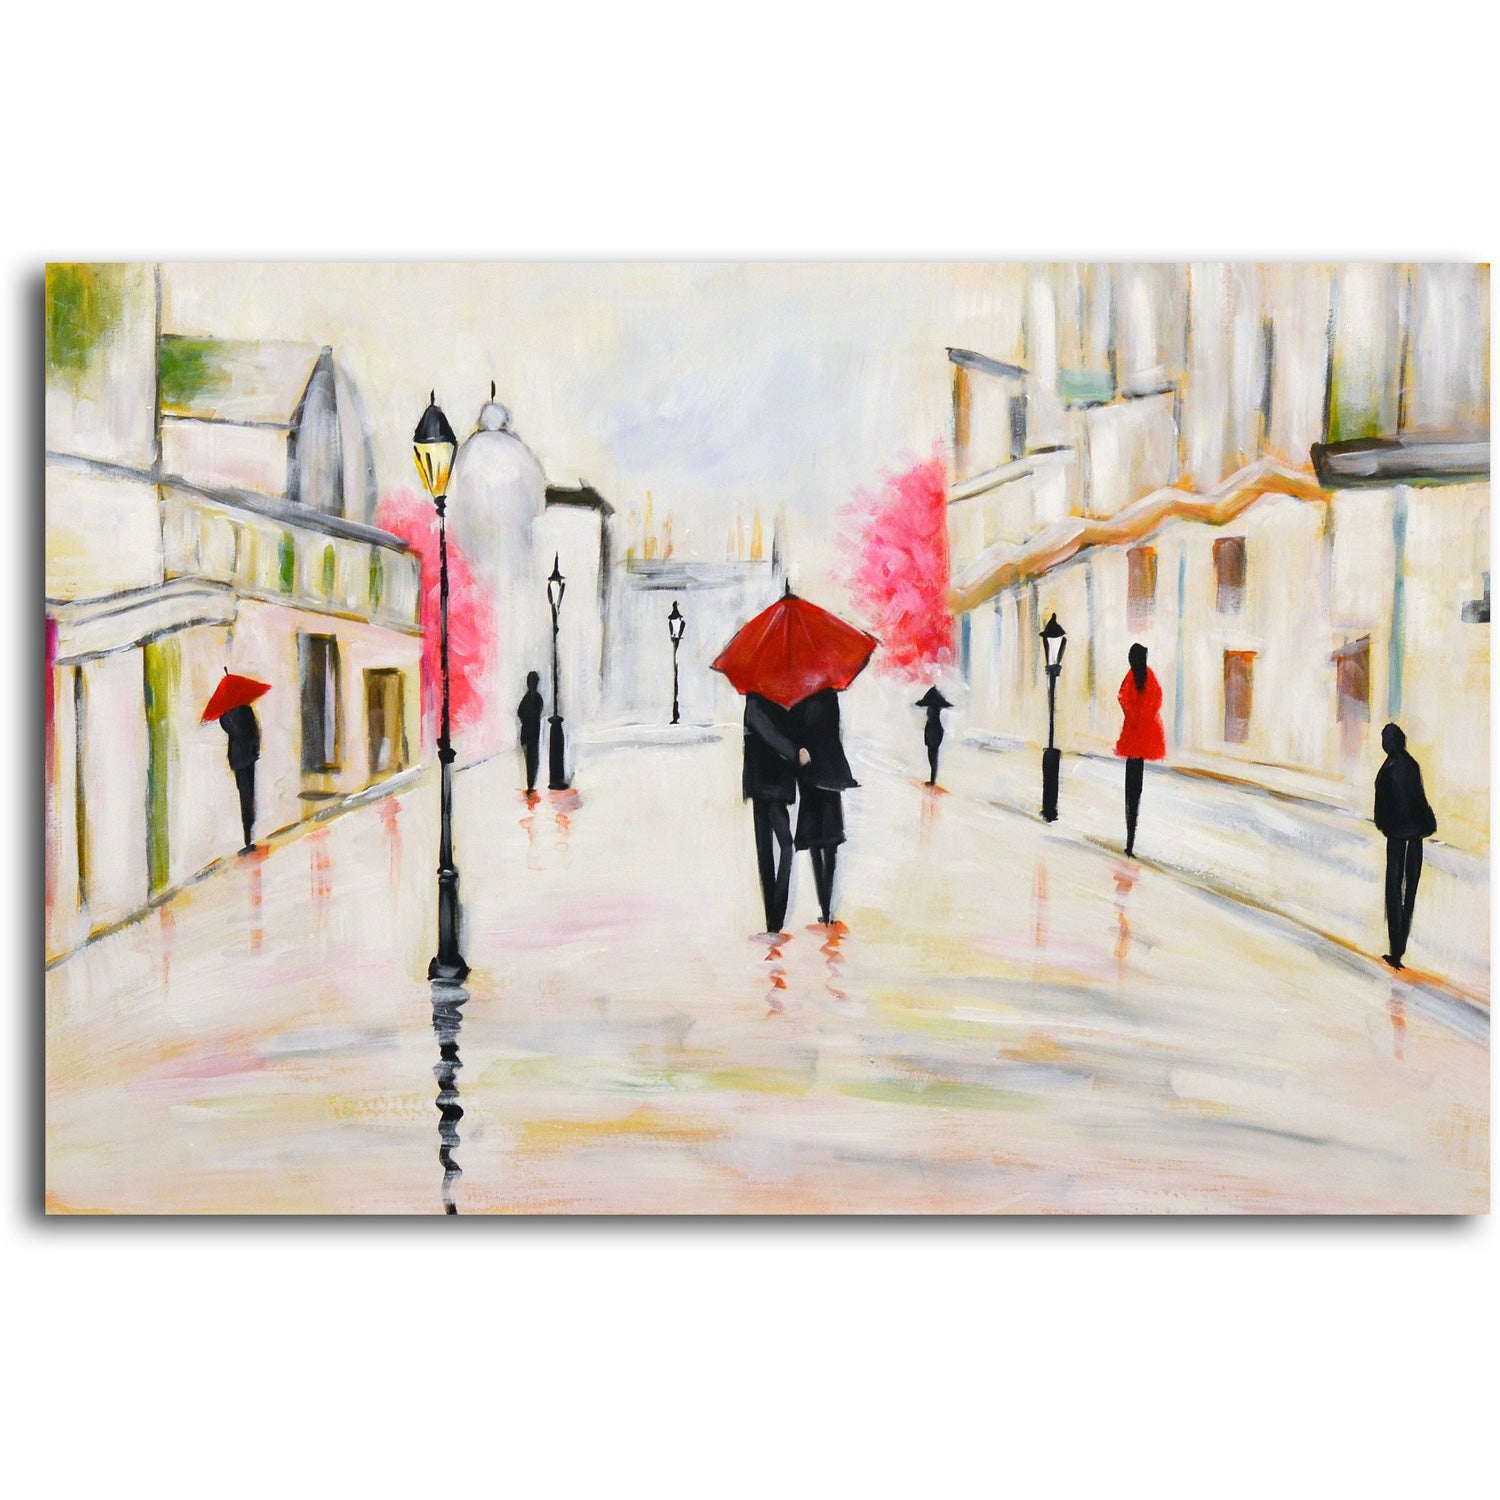 "A Walk in the Rain" Original painting on canvas - Set of 2